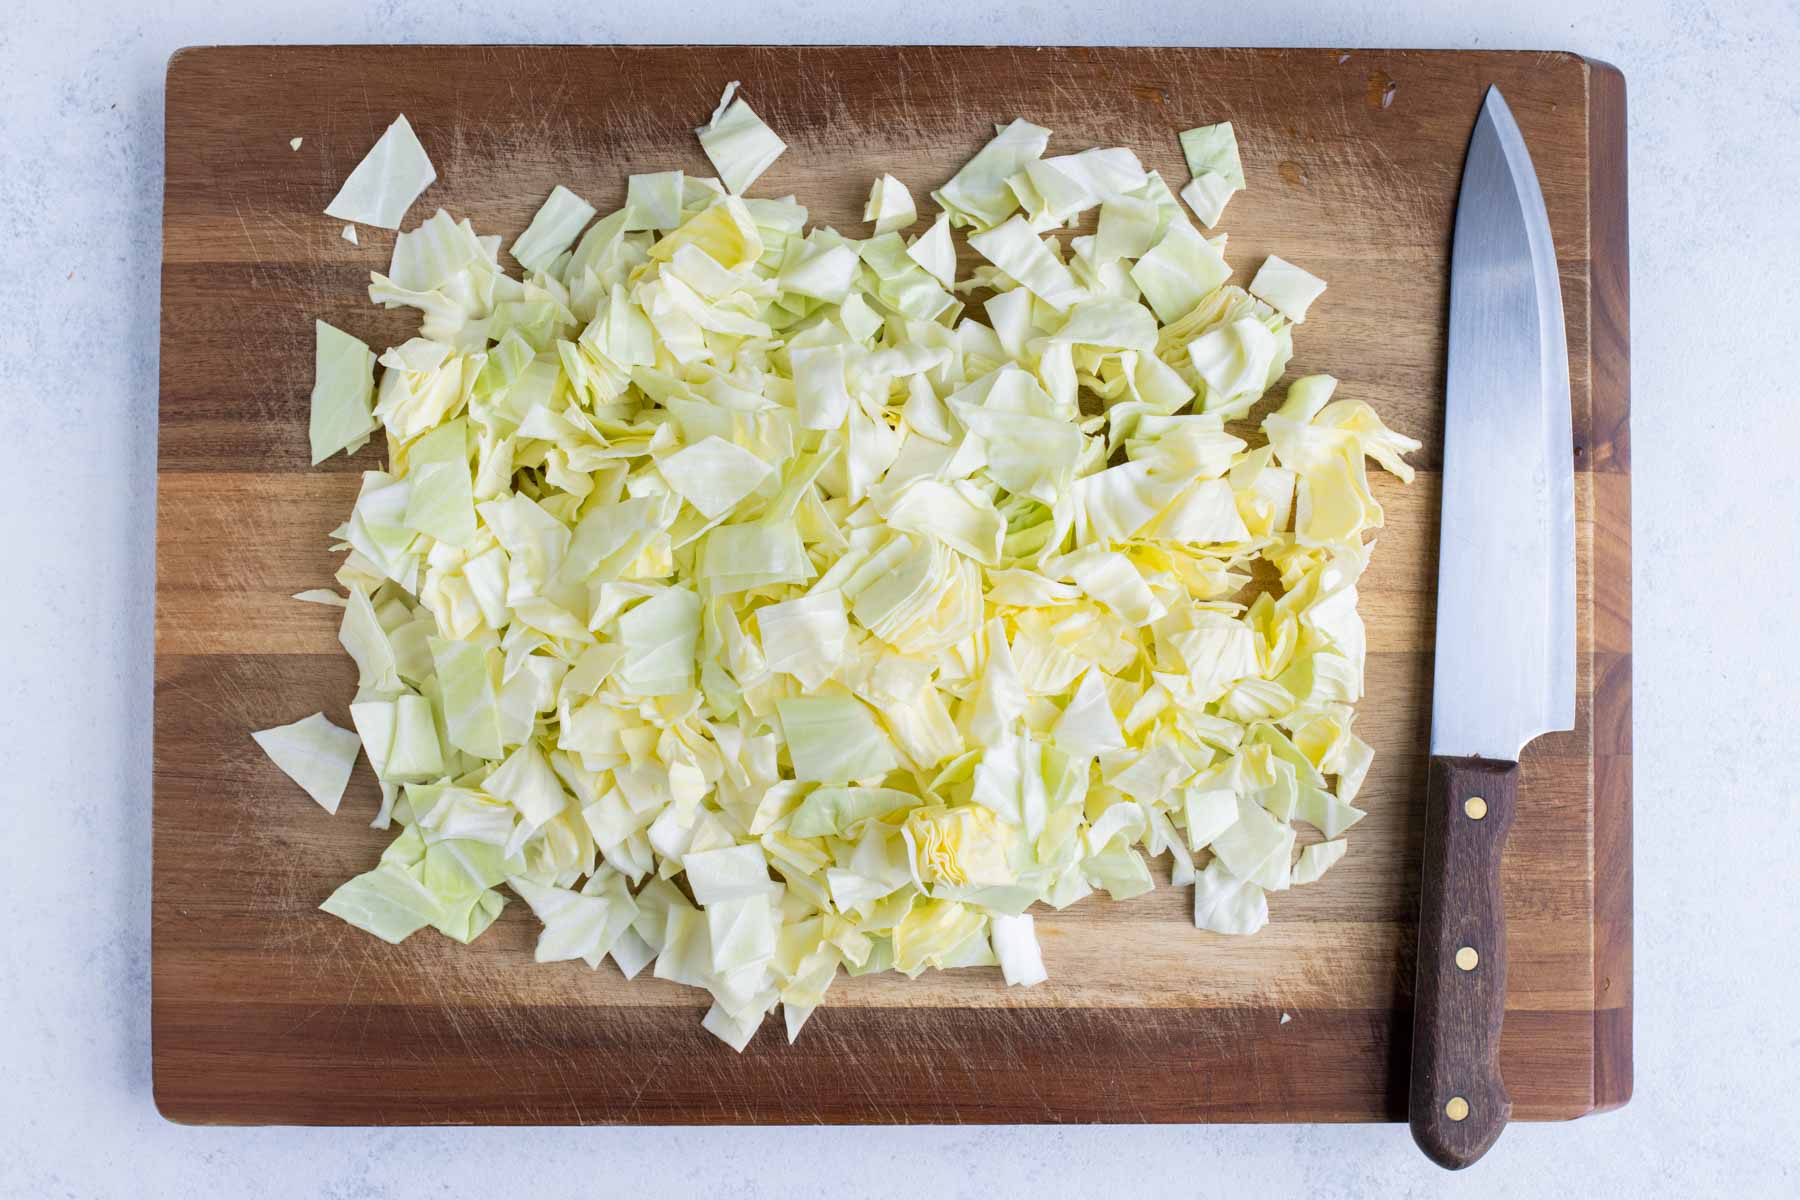 Cabbage is chopped into thin pieces.